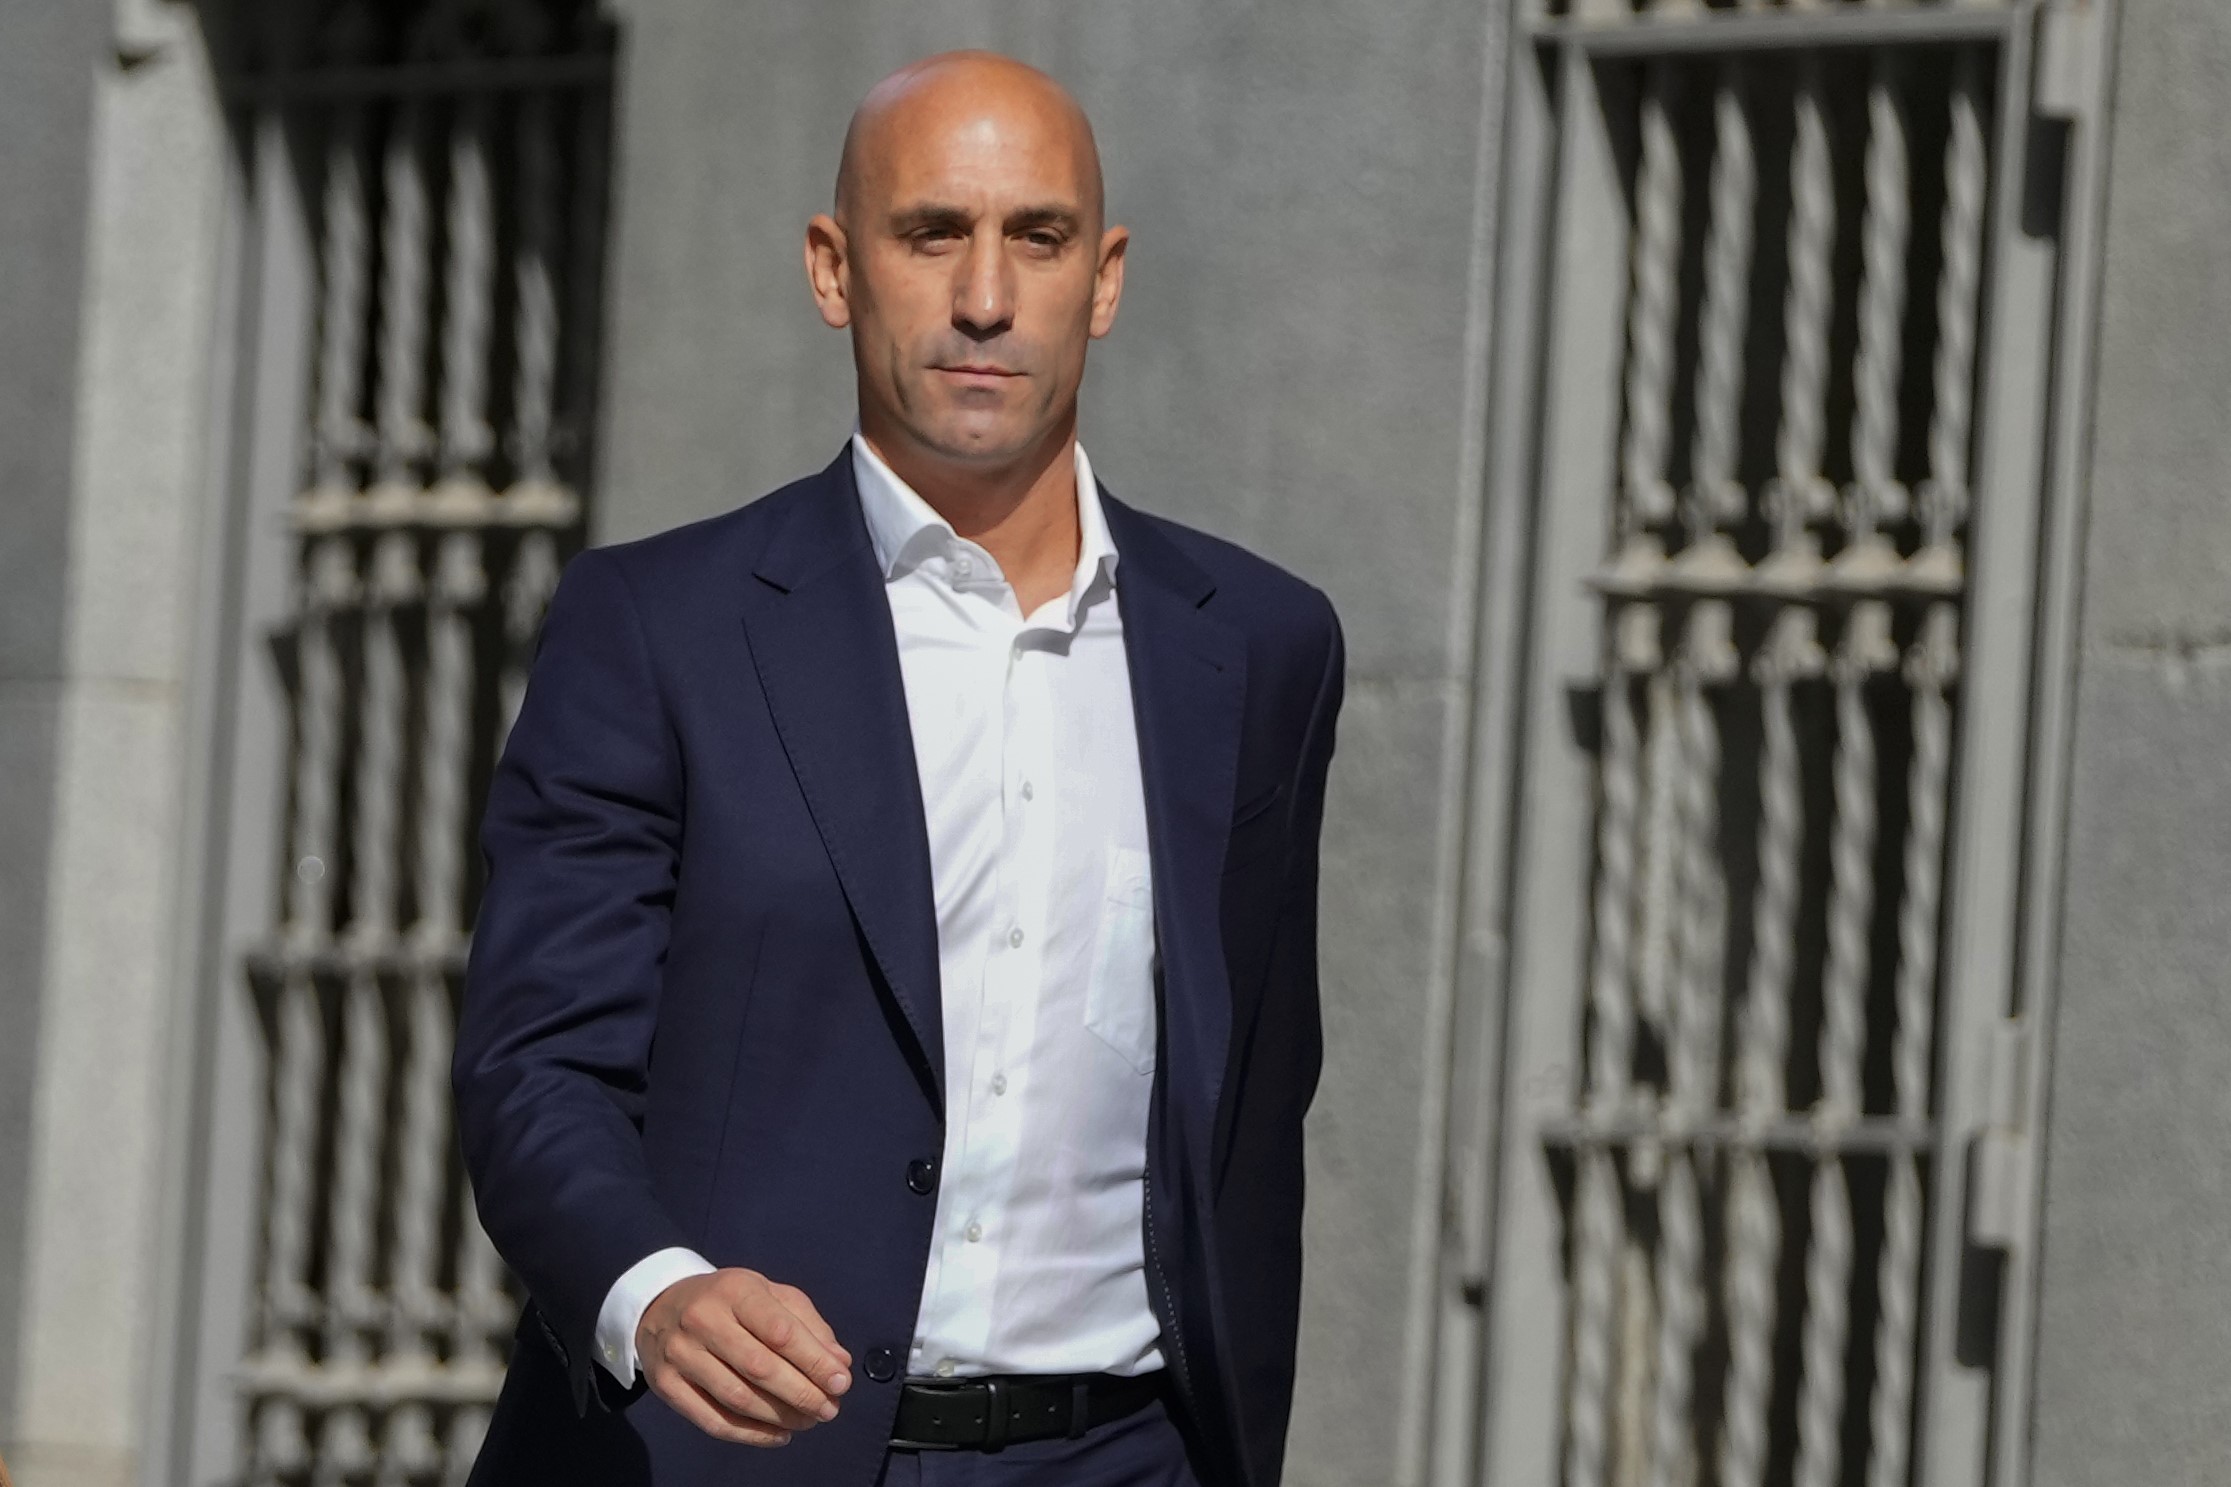 FIFA considered more severe sanctions against Spain's ex-FA chief Rubiales